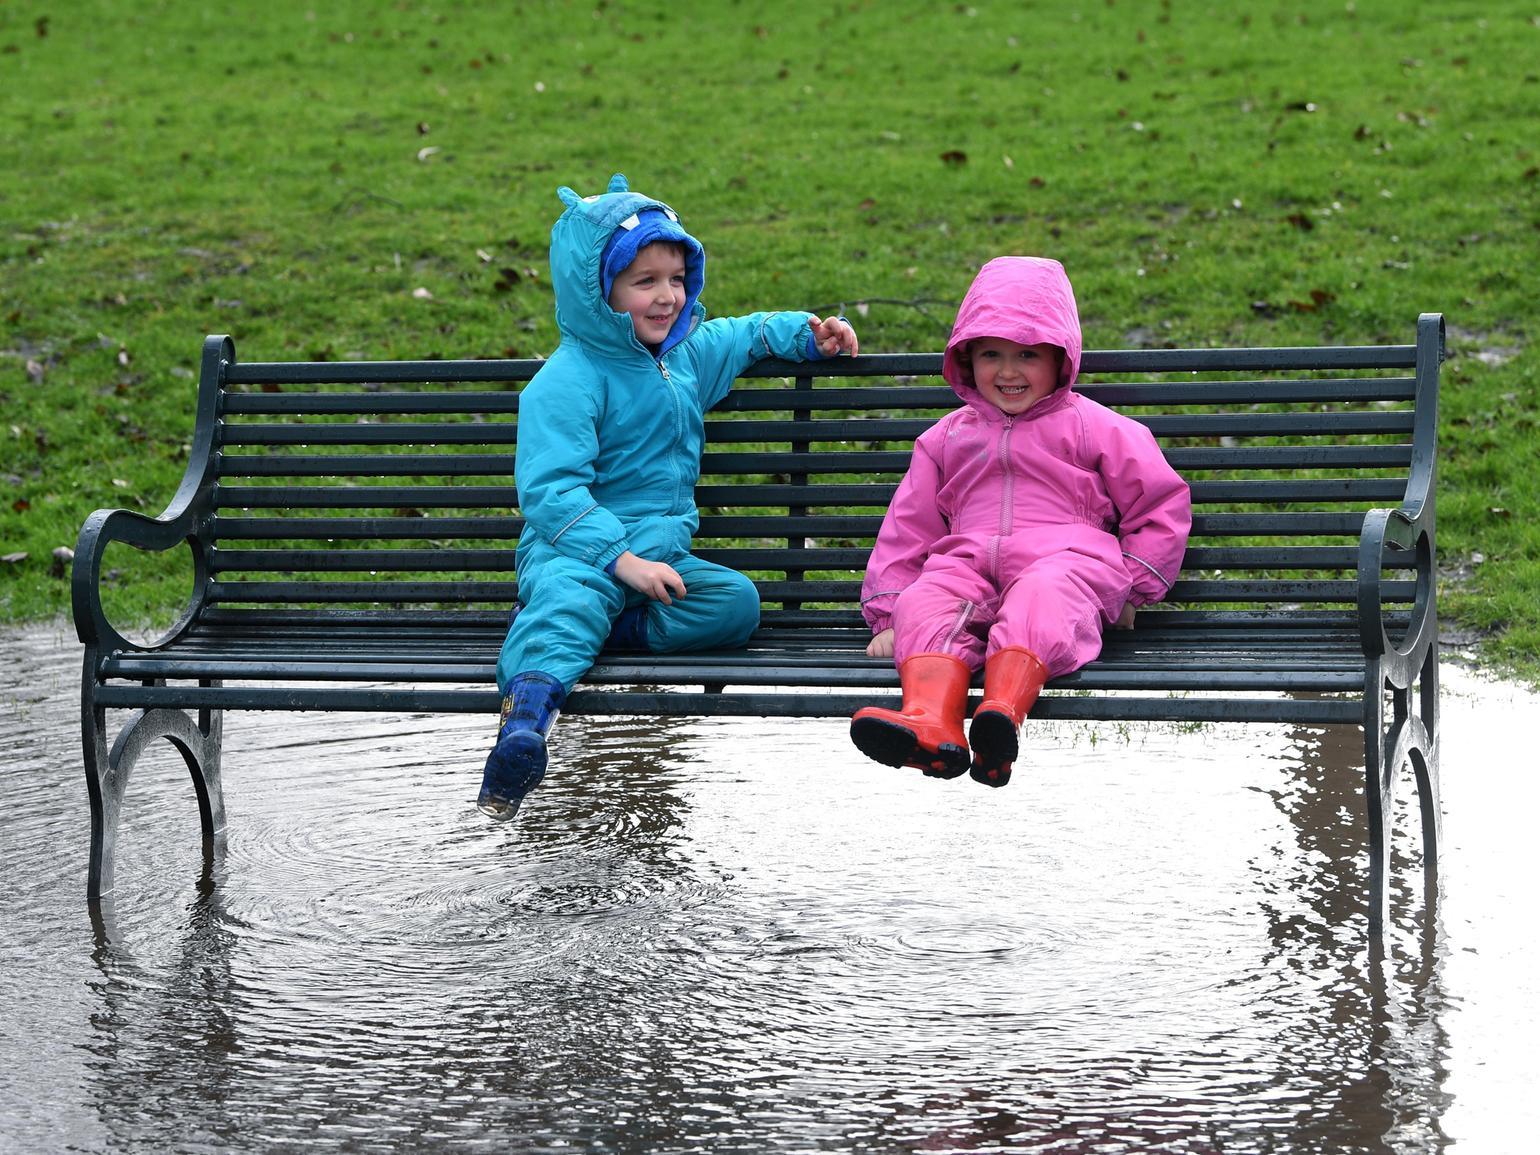 Wesley and Poppy Gower have fun in the flood water at Kirkstall Abbey during storm Ciara.